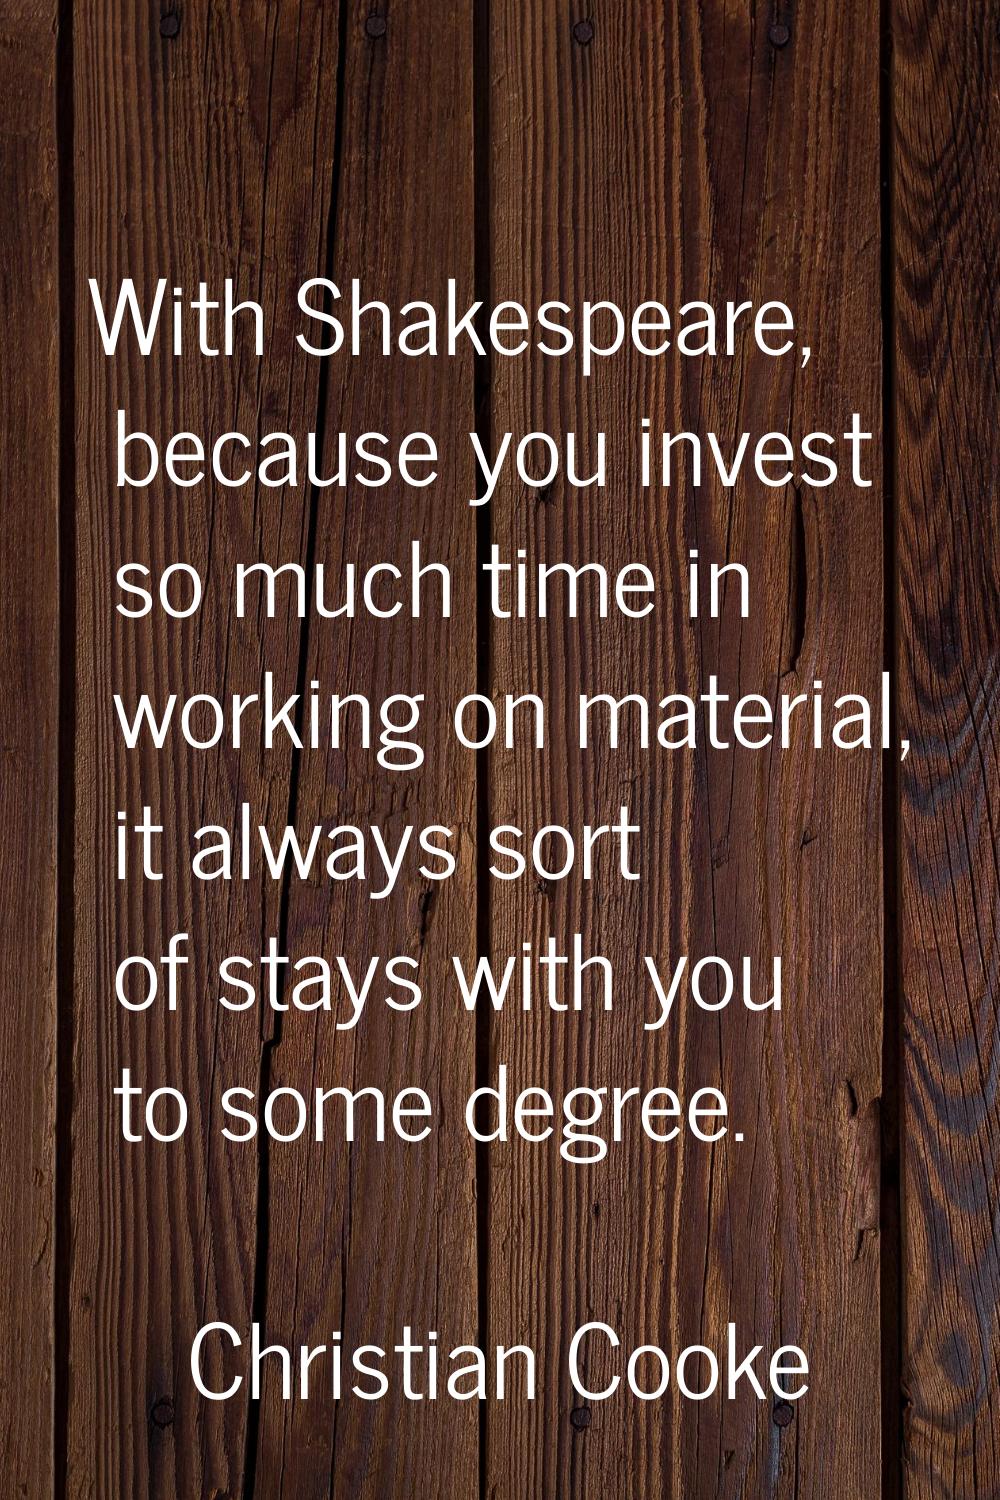 With Shakespeare, because you invest so much time in working on material, it always sort of stays w